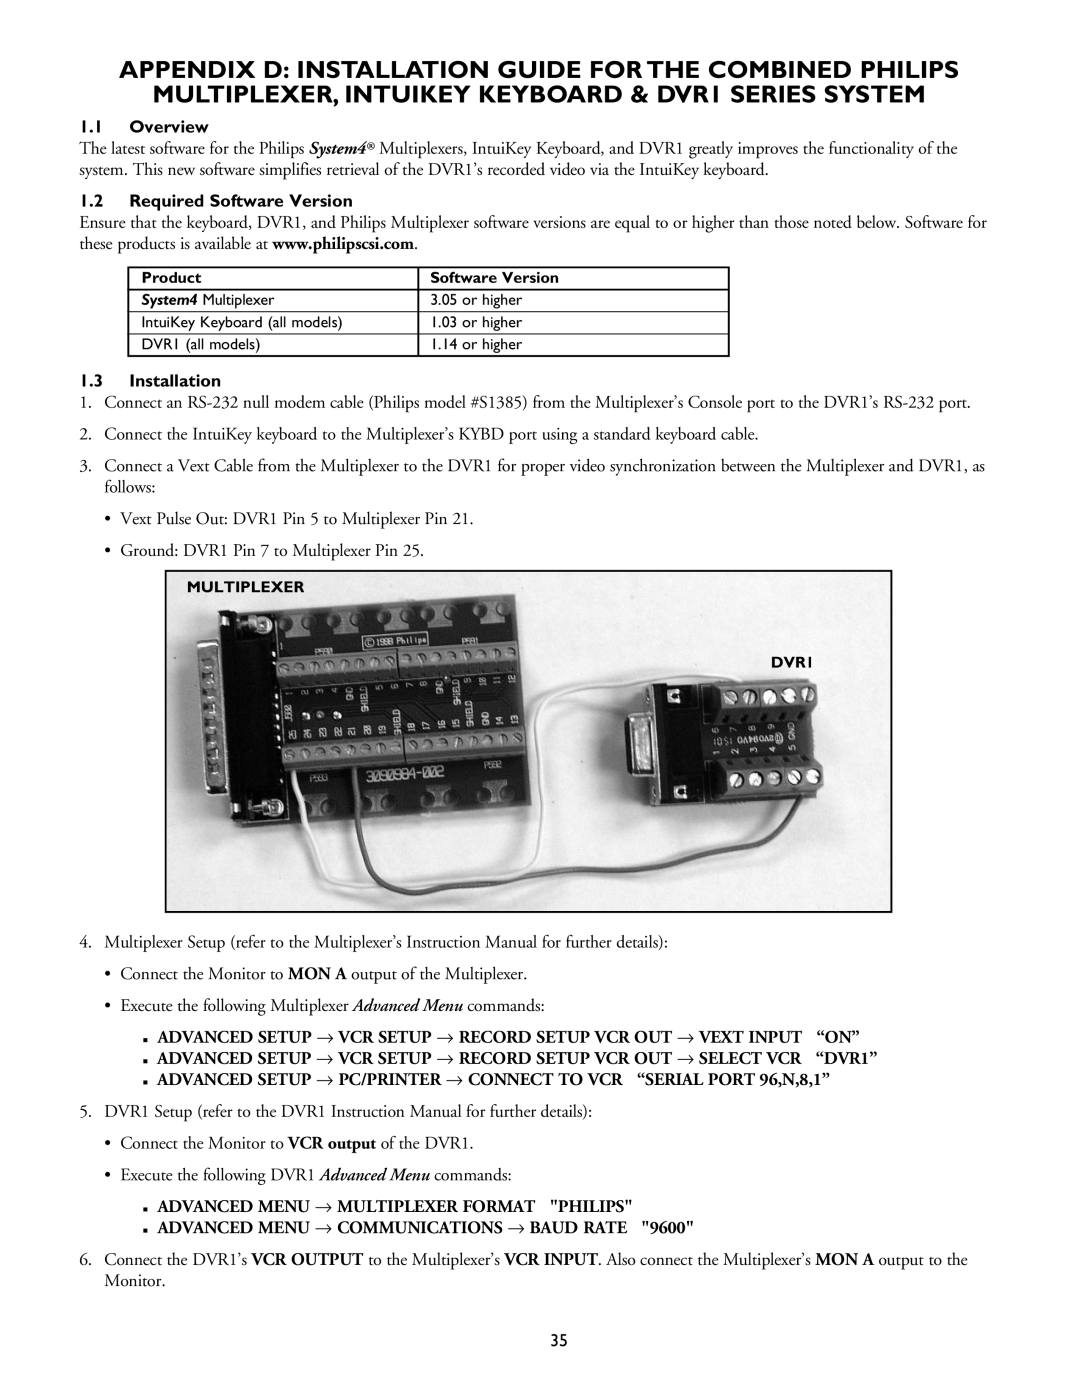 Philips DVR1EP32 Appendix D Installation Guide For The Combined Philips, Advanced Menu → Multiplexer Format Philips 